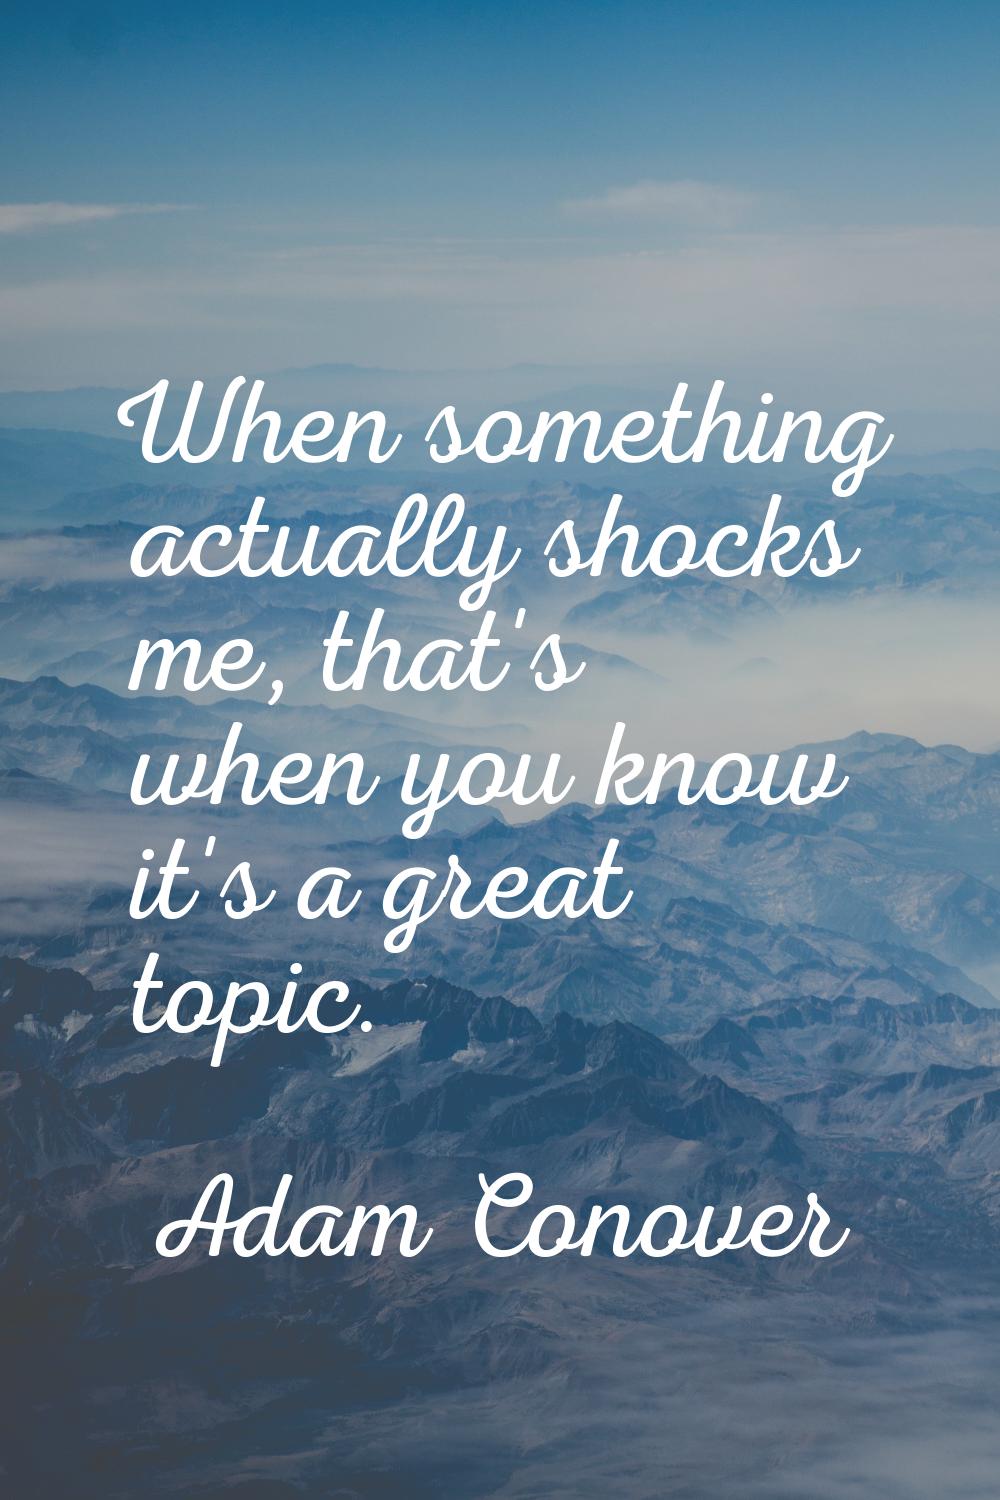 When something actually shocks me, that's when you know it's a great topic.